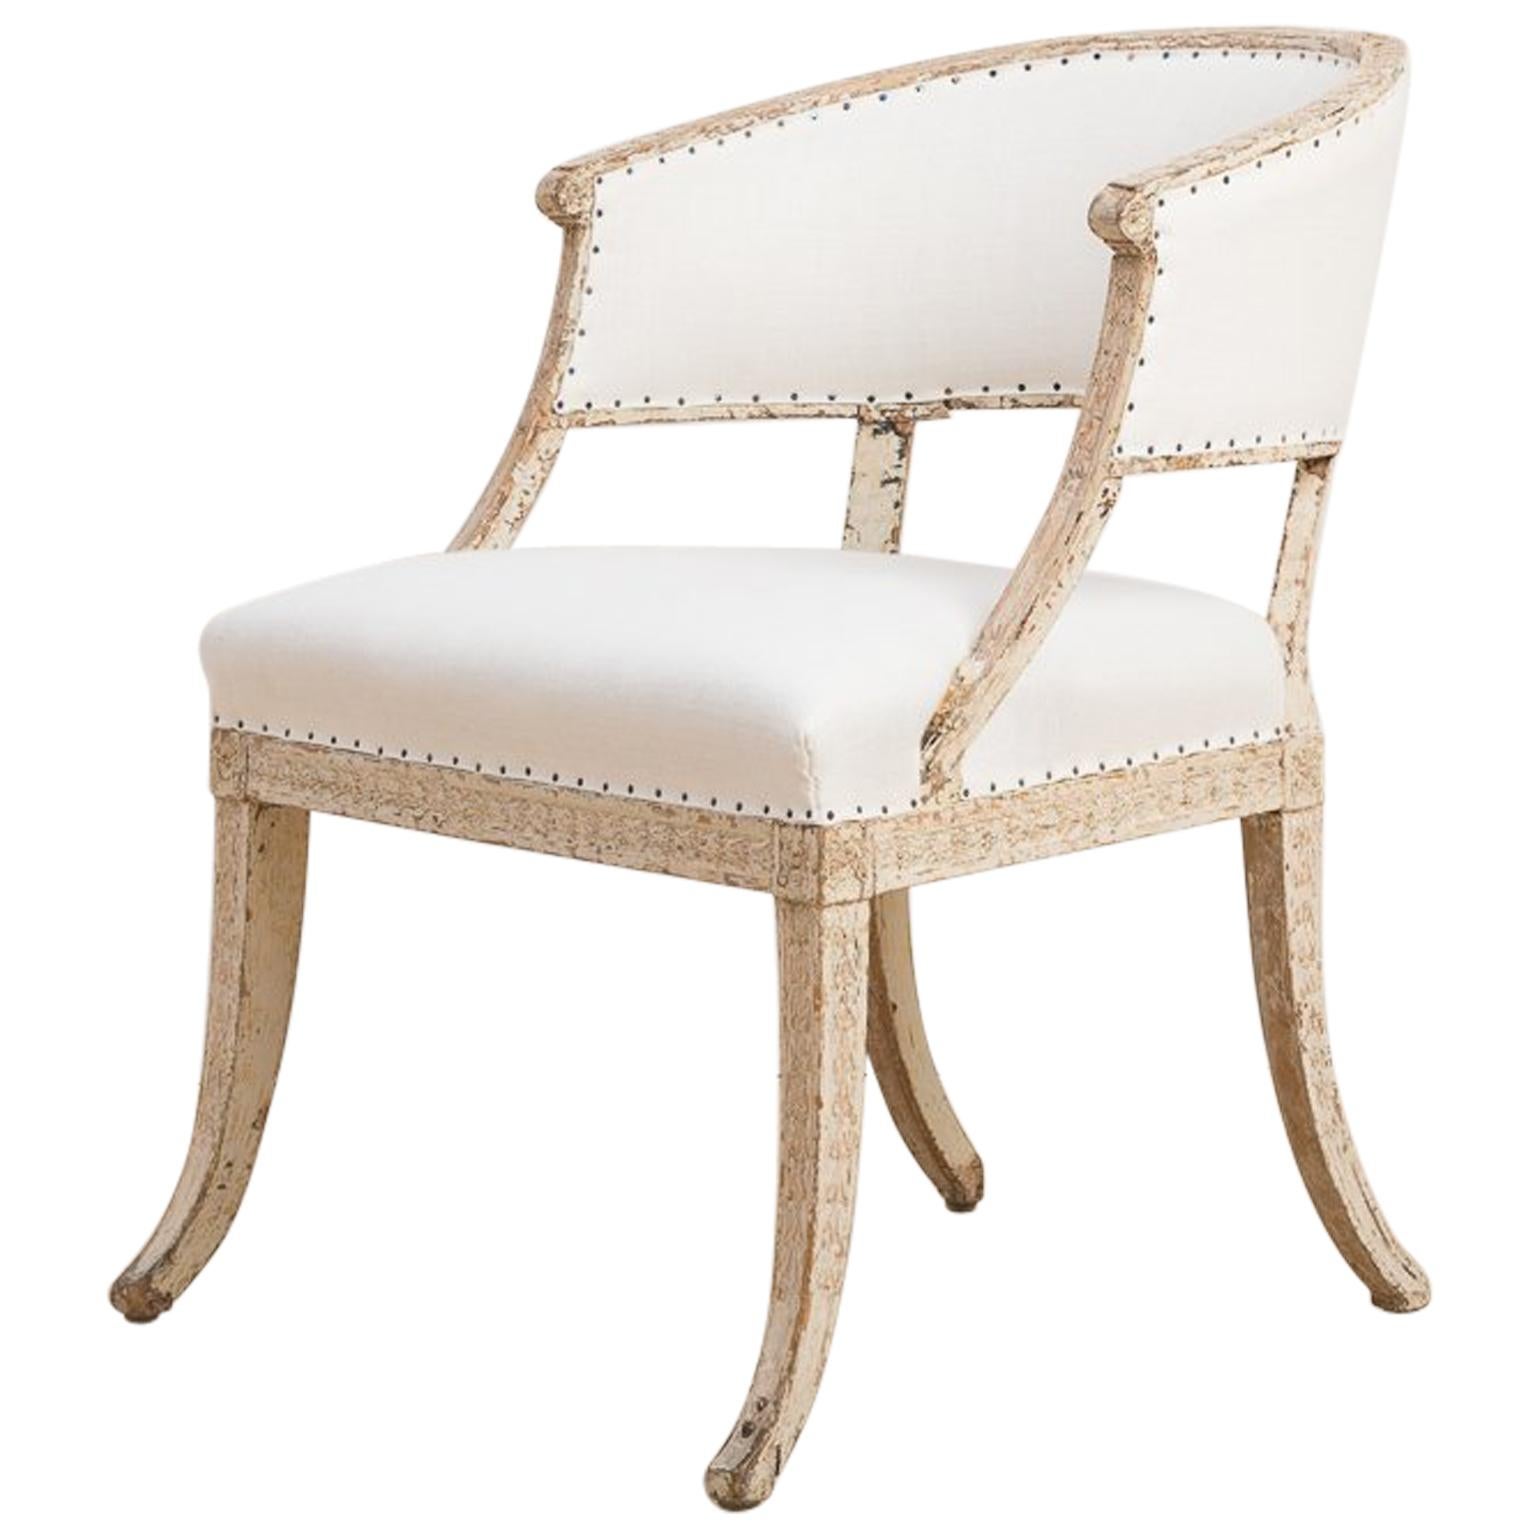 Swedish Gustavian Barrel Back Armchair from the Late 18th Century